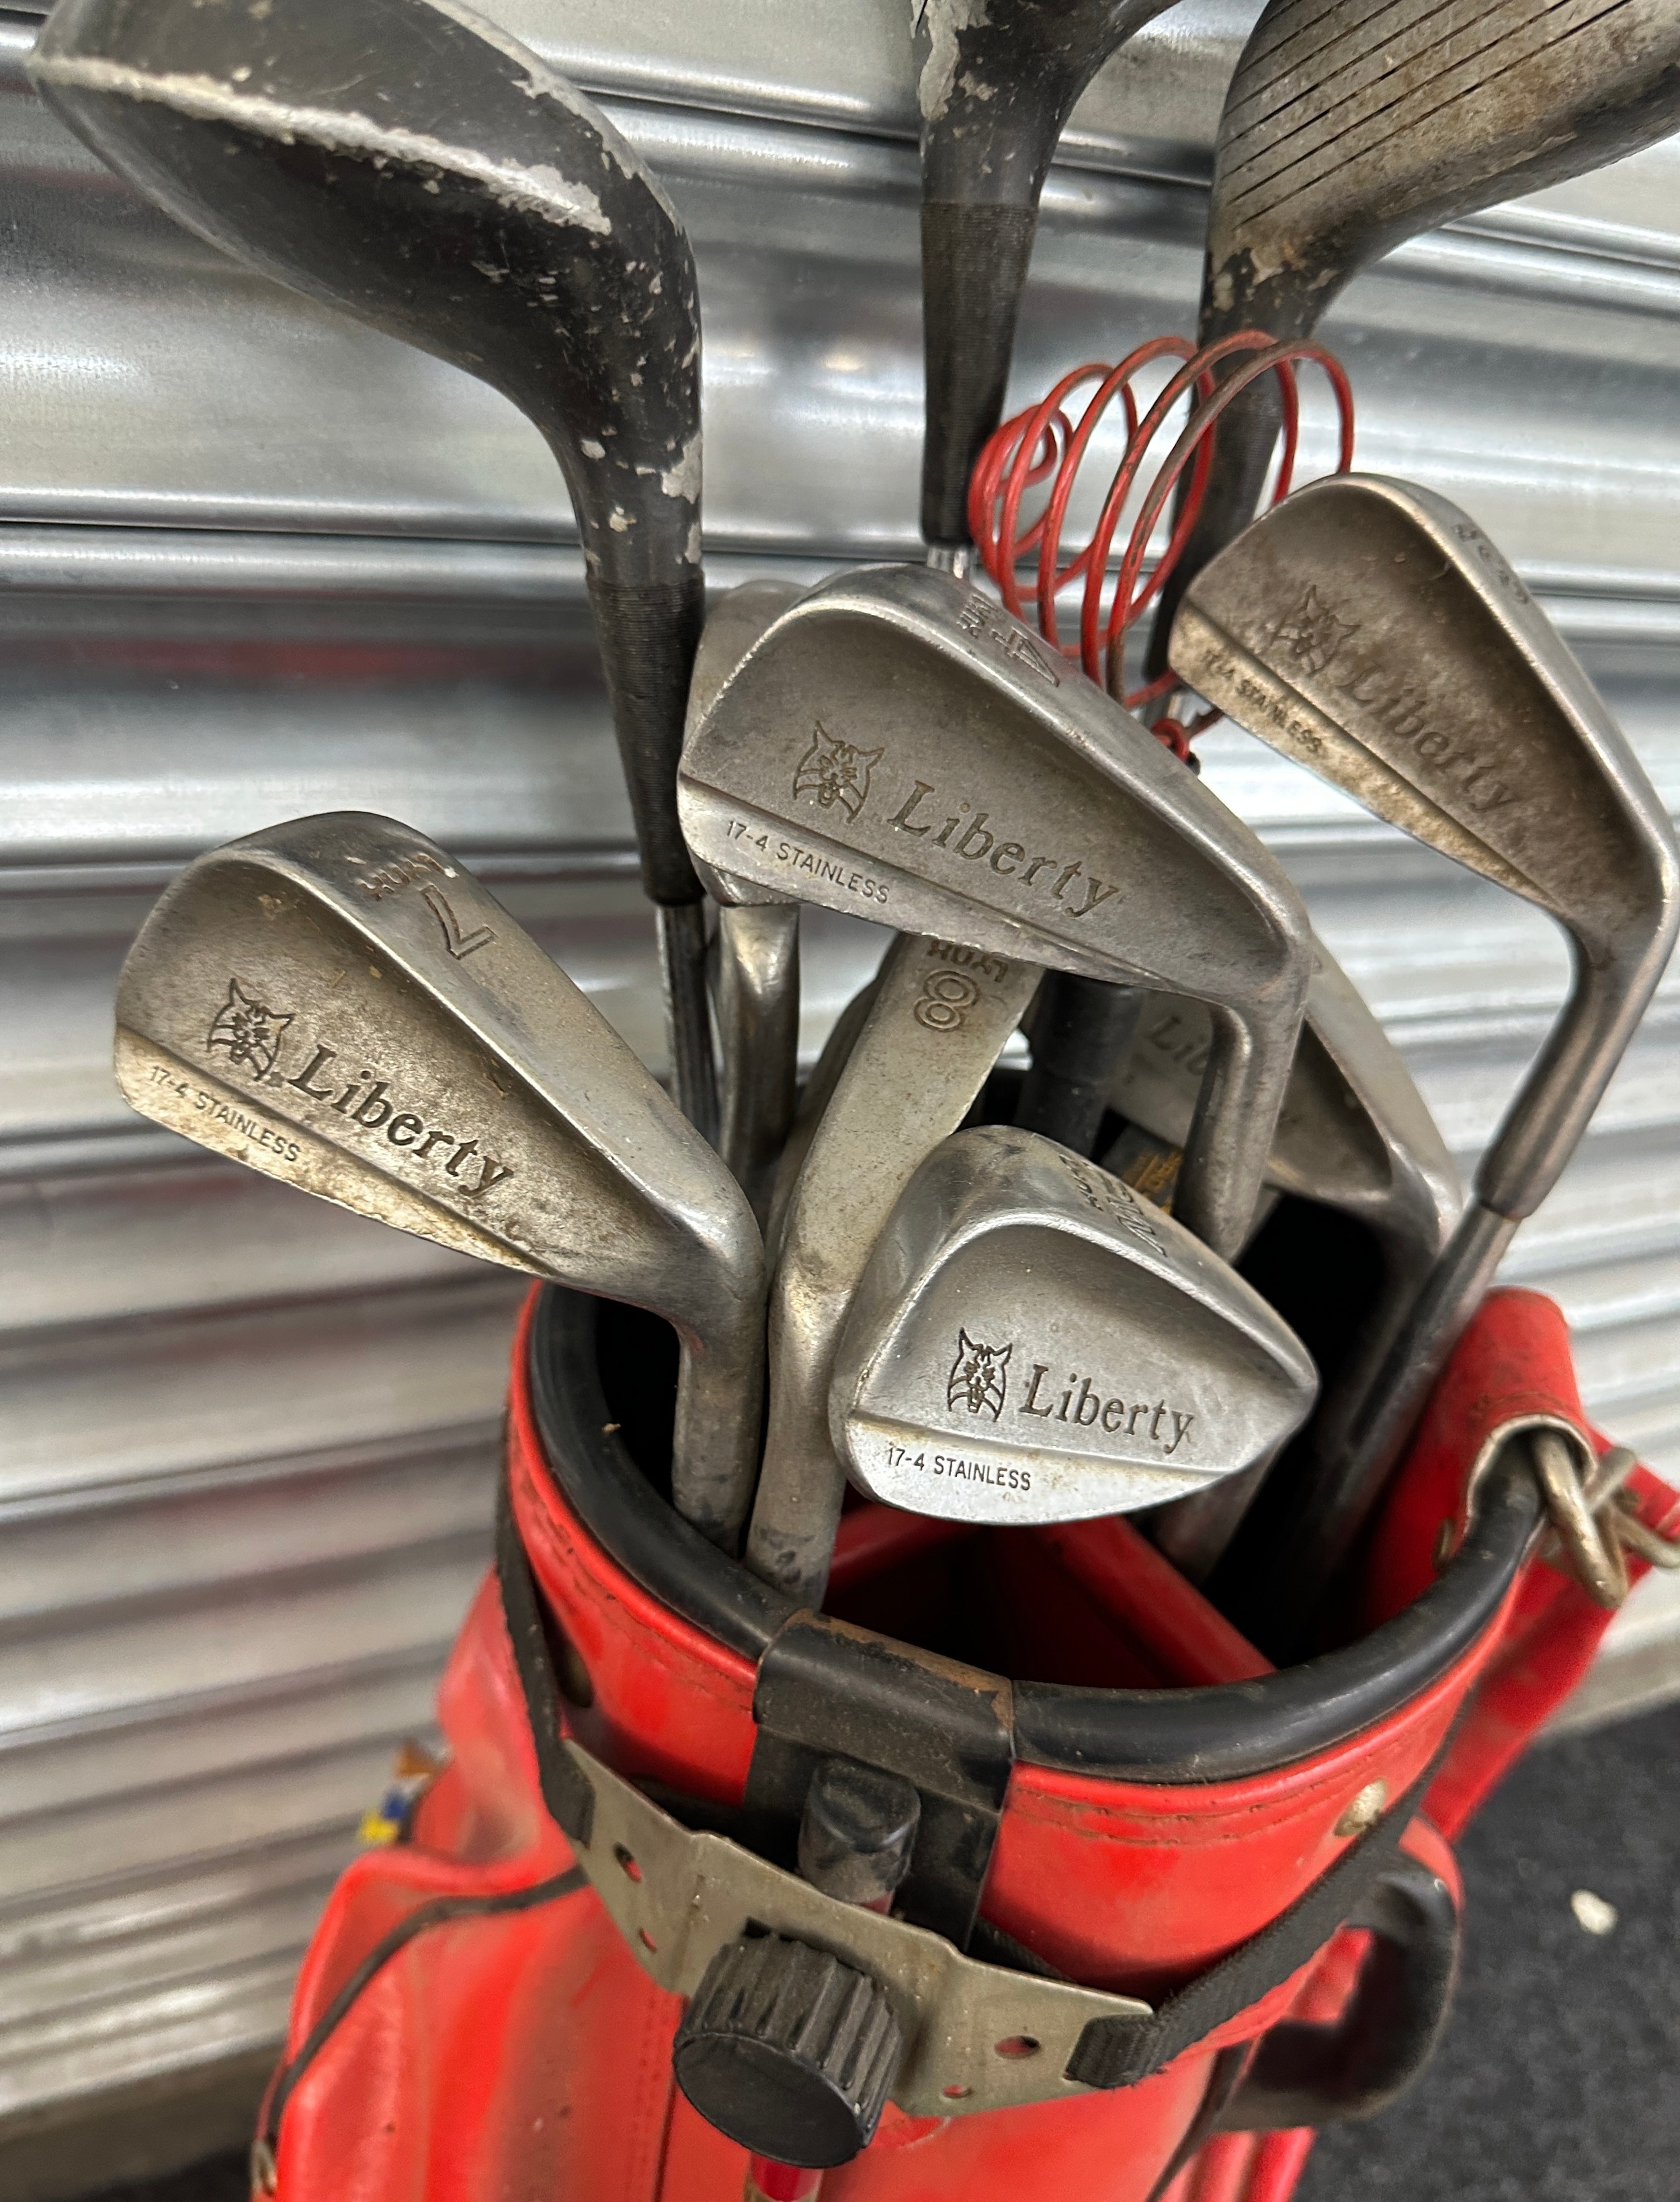 Cased liberty's golf clubs - Image 2 of 5